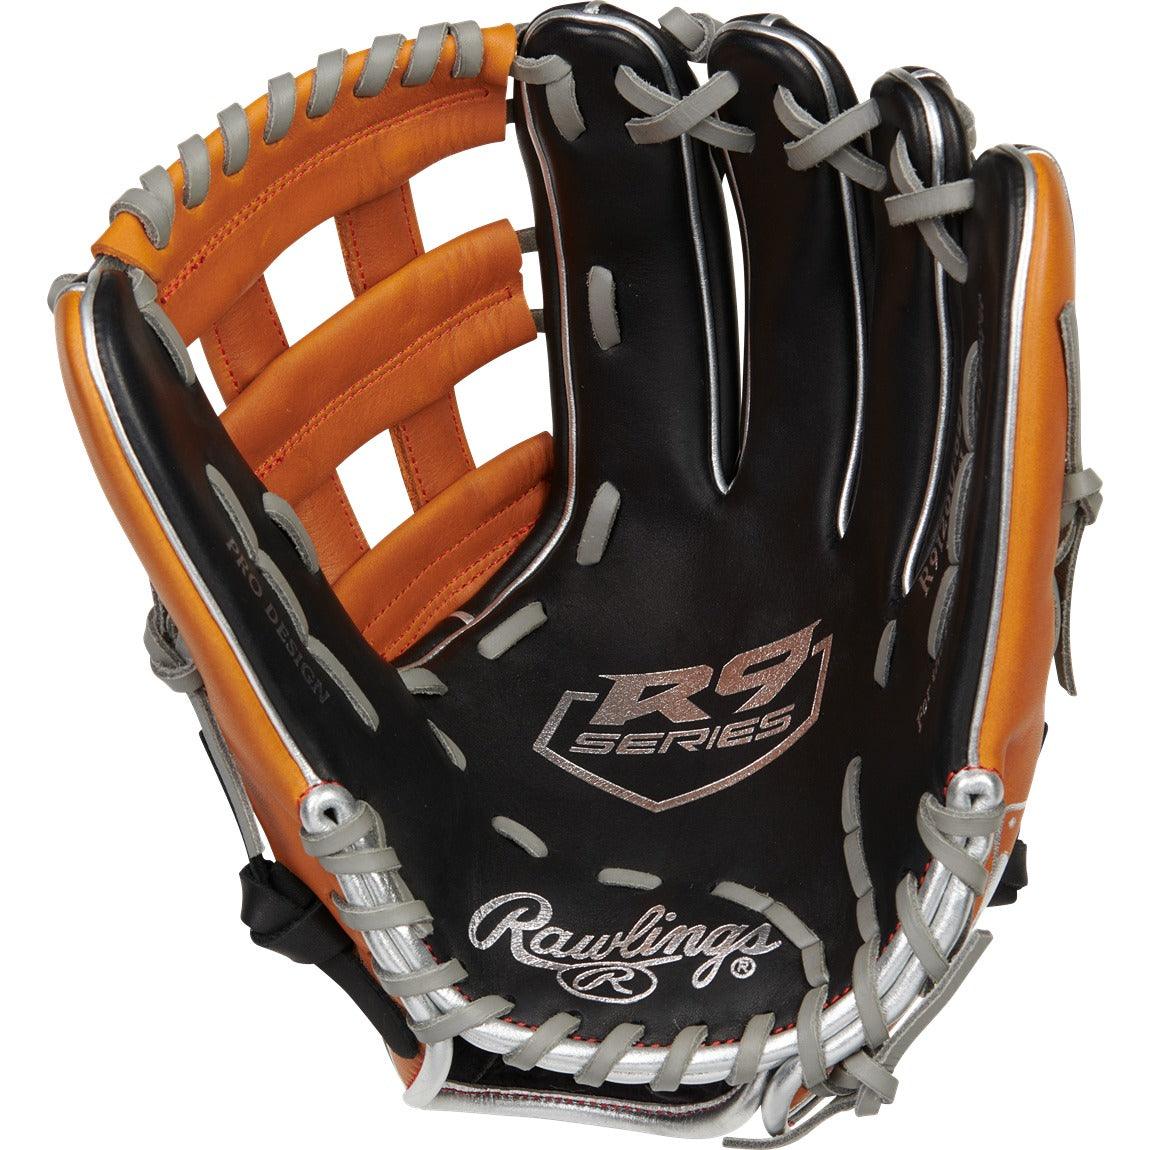 R9 ContoUR 12" Baseball Glove - Youth - Sports Excellence